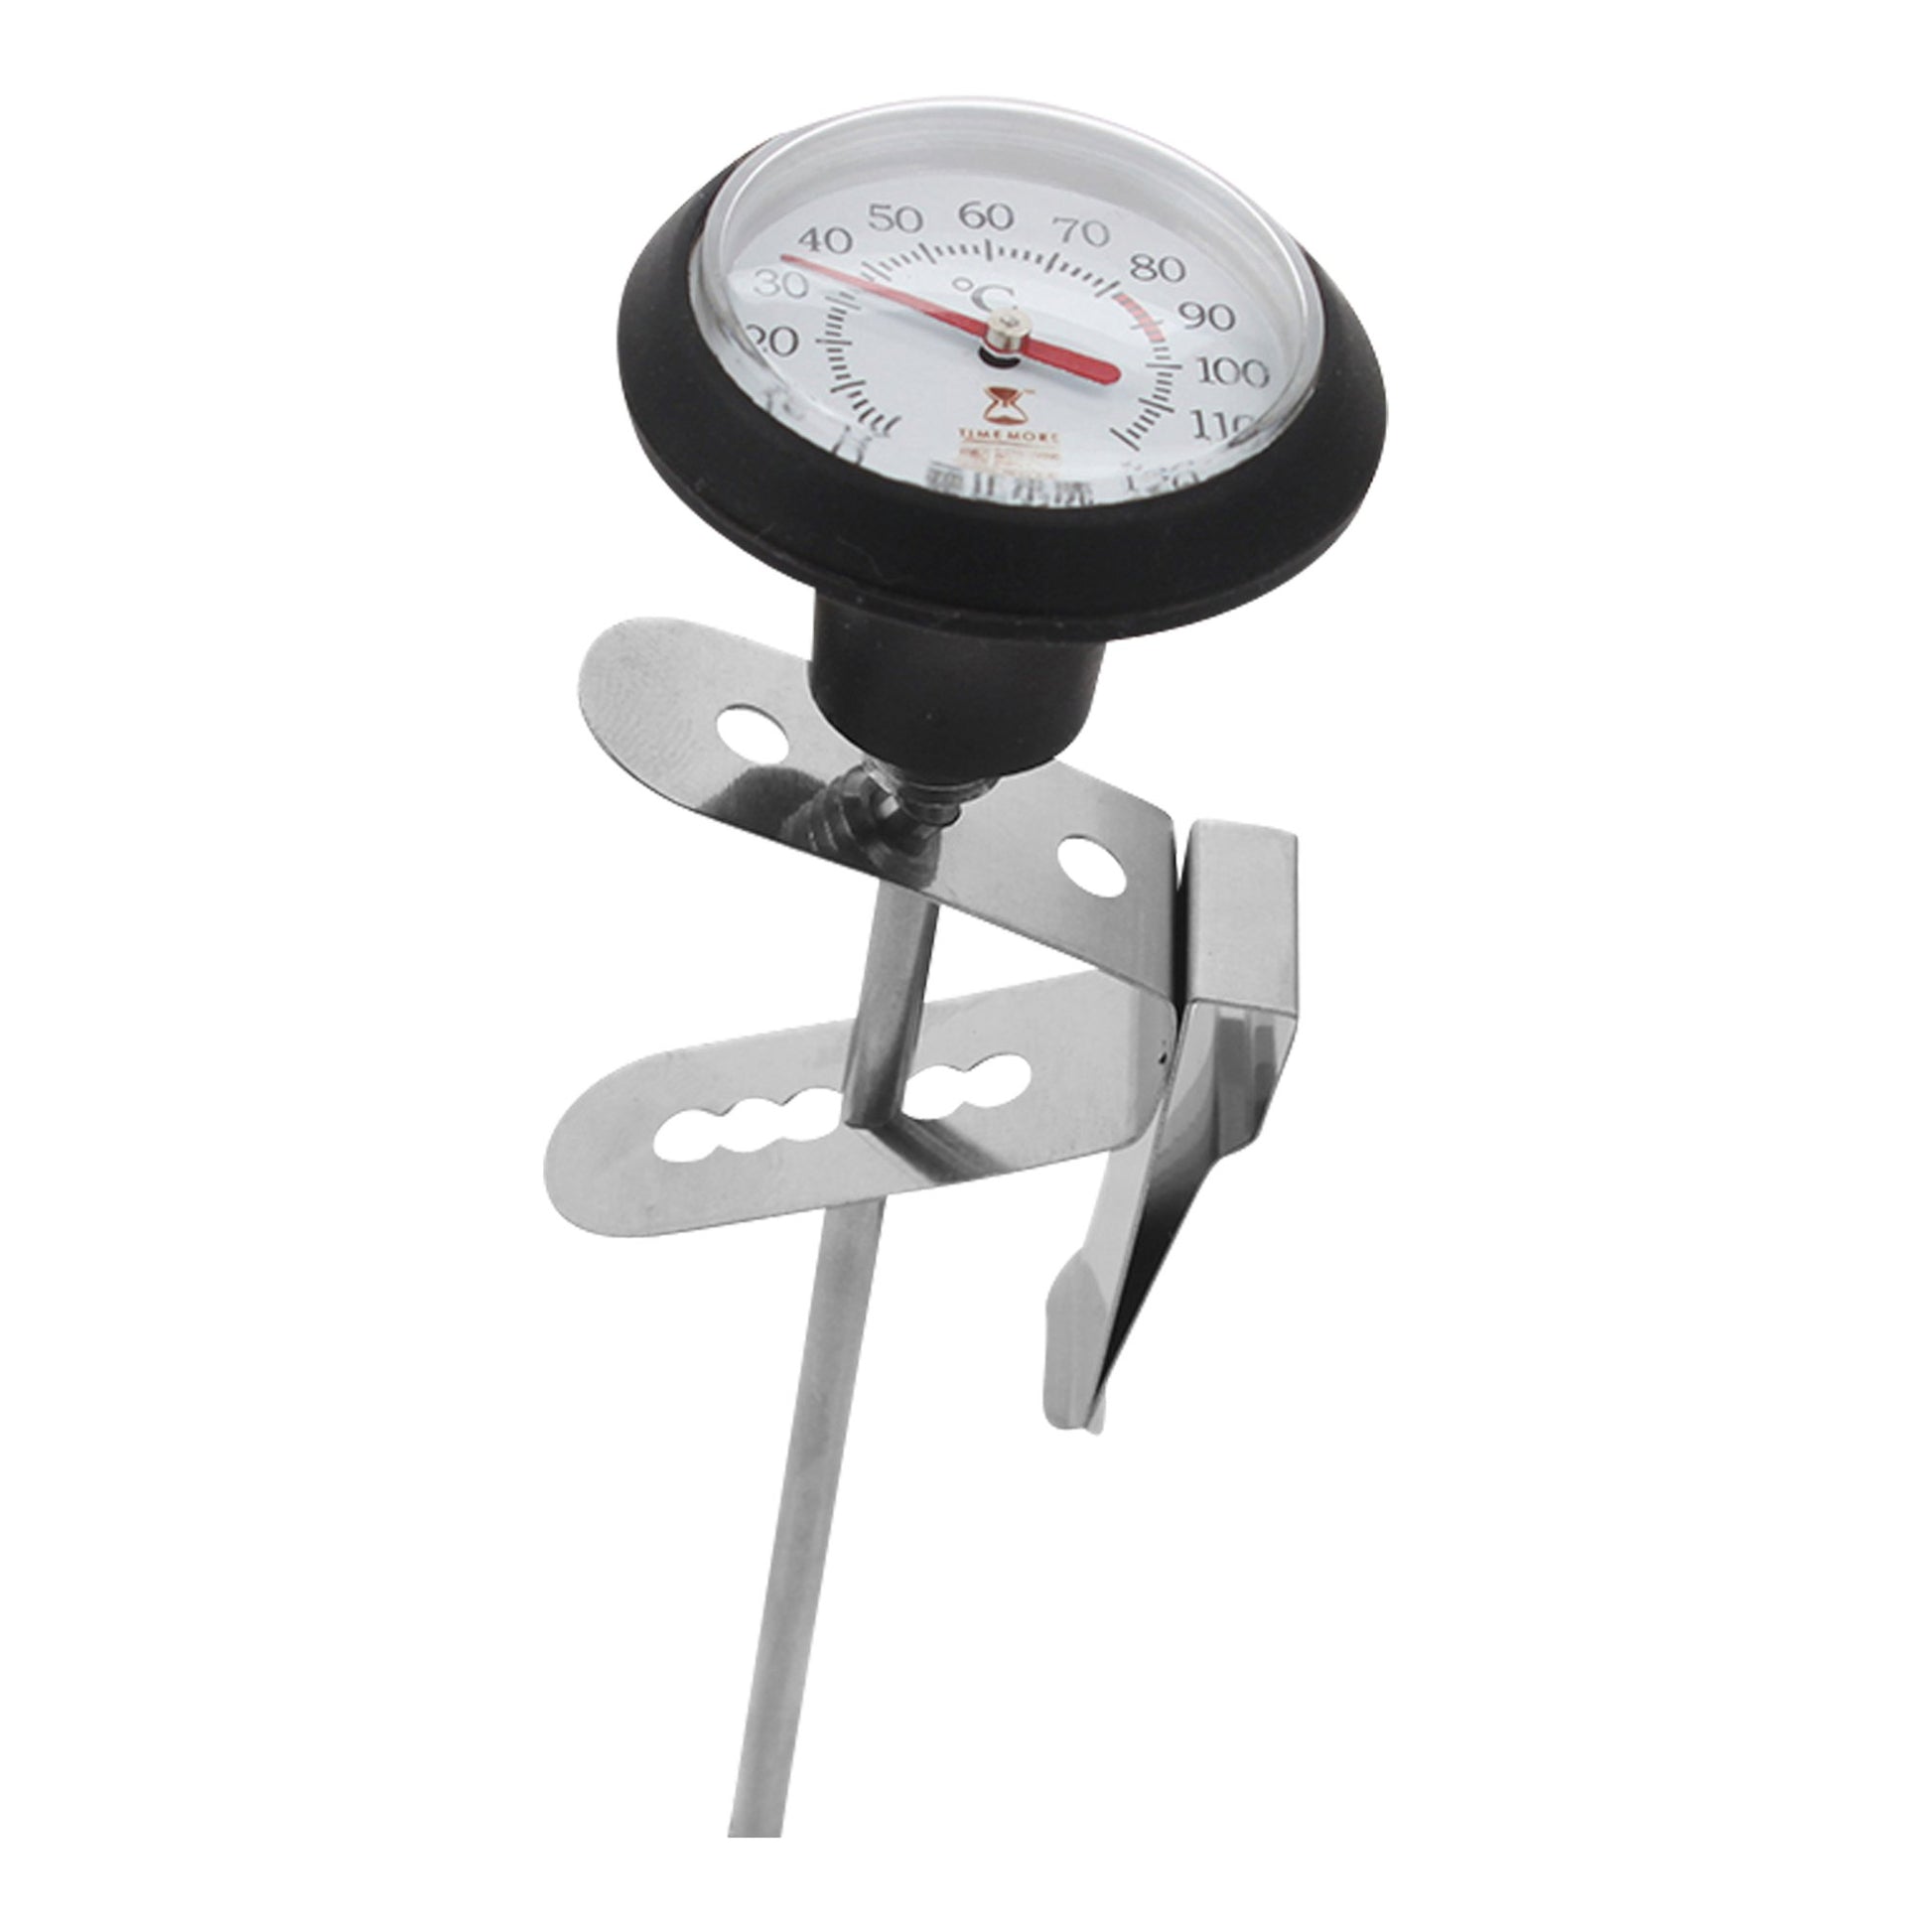 Timemore - Thermometer Wholesaler and Supplier in Kuwait (Can be used for water temperature measurement)